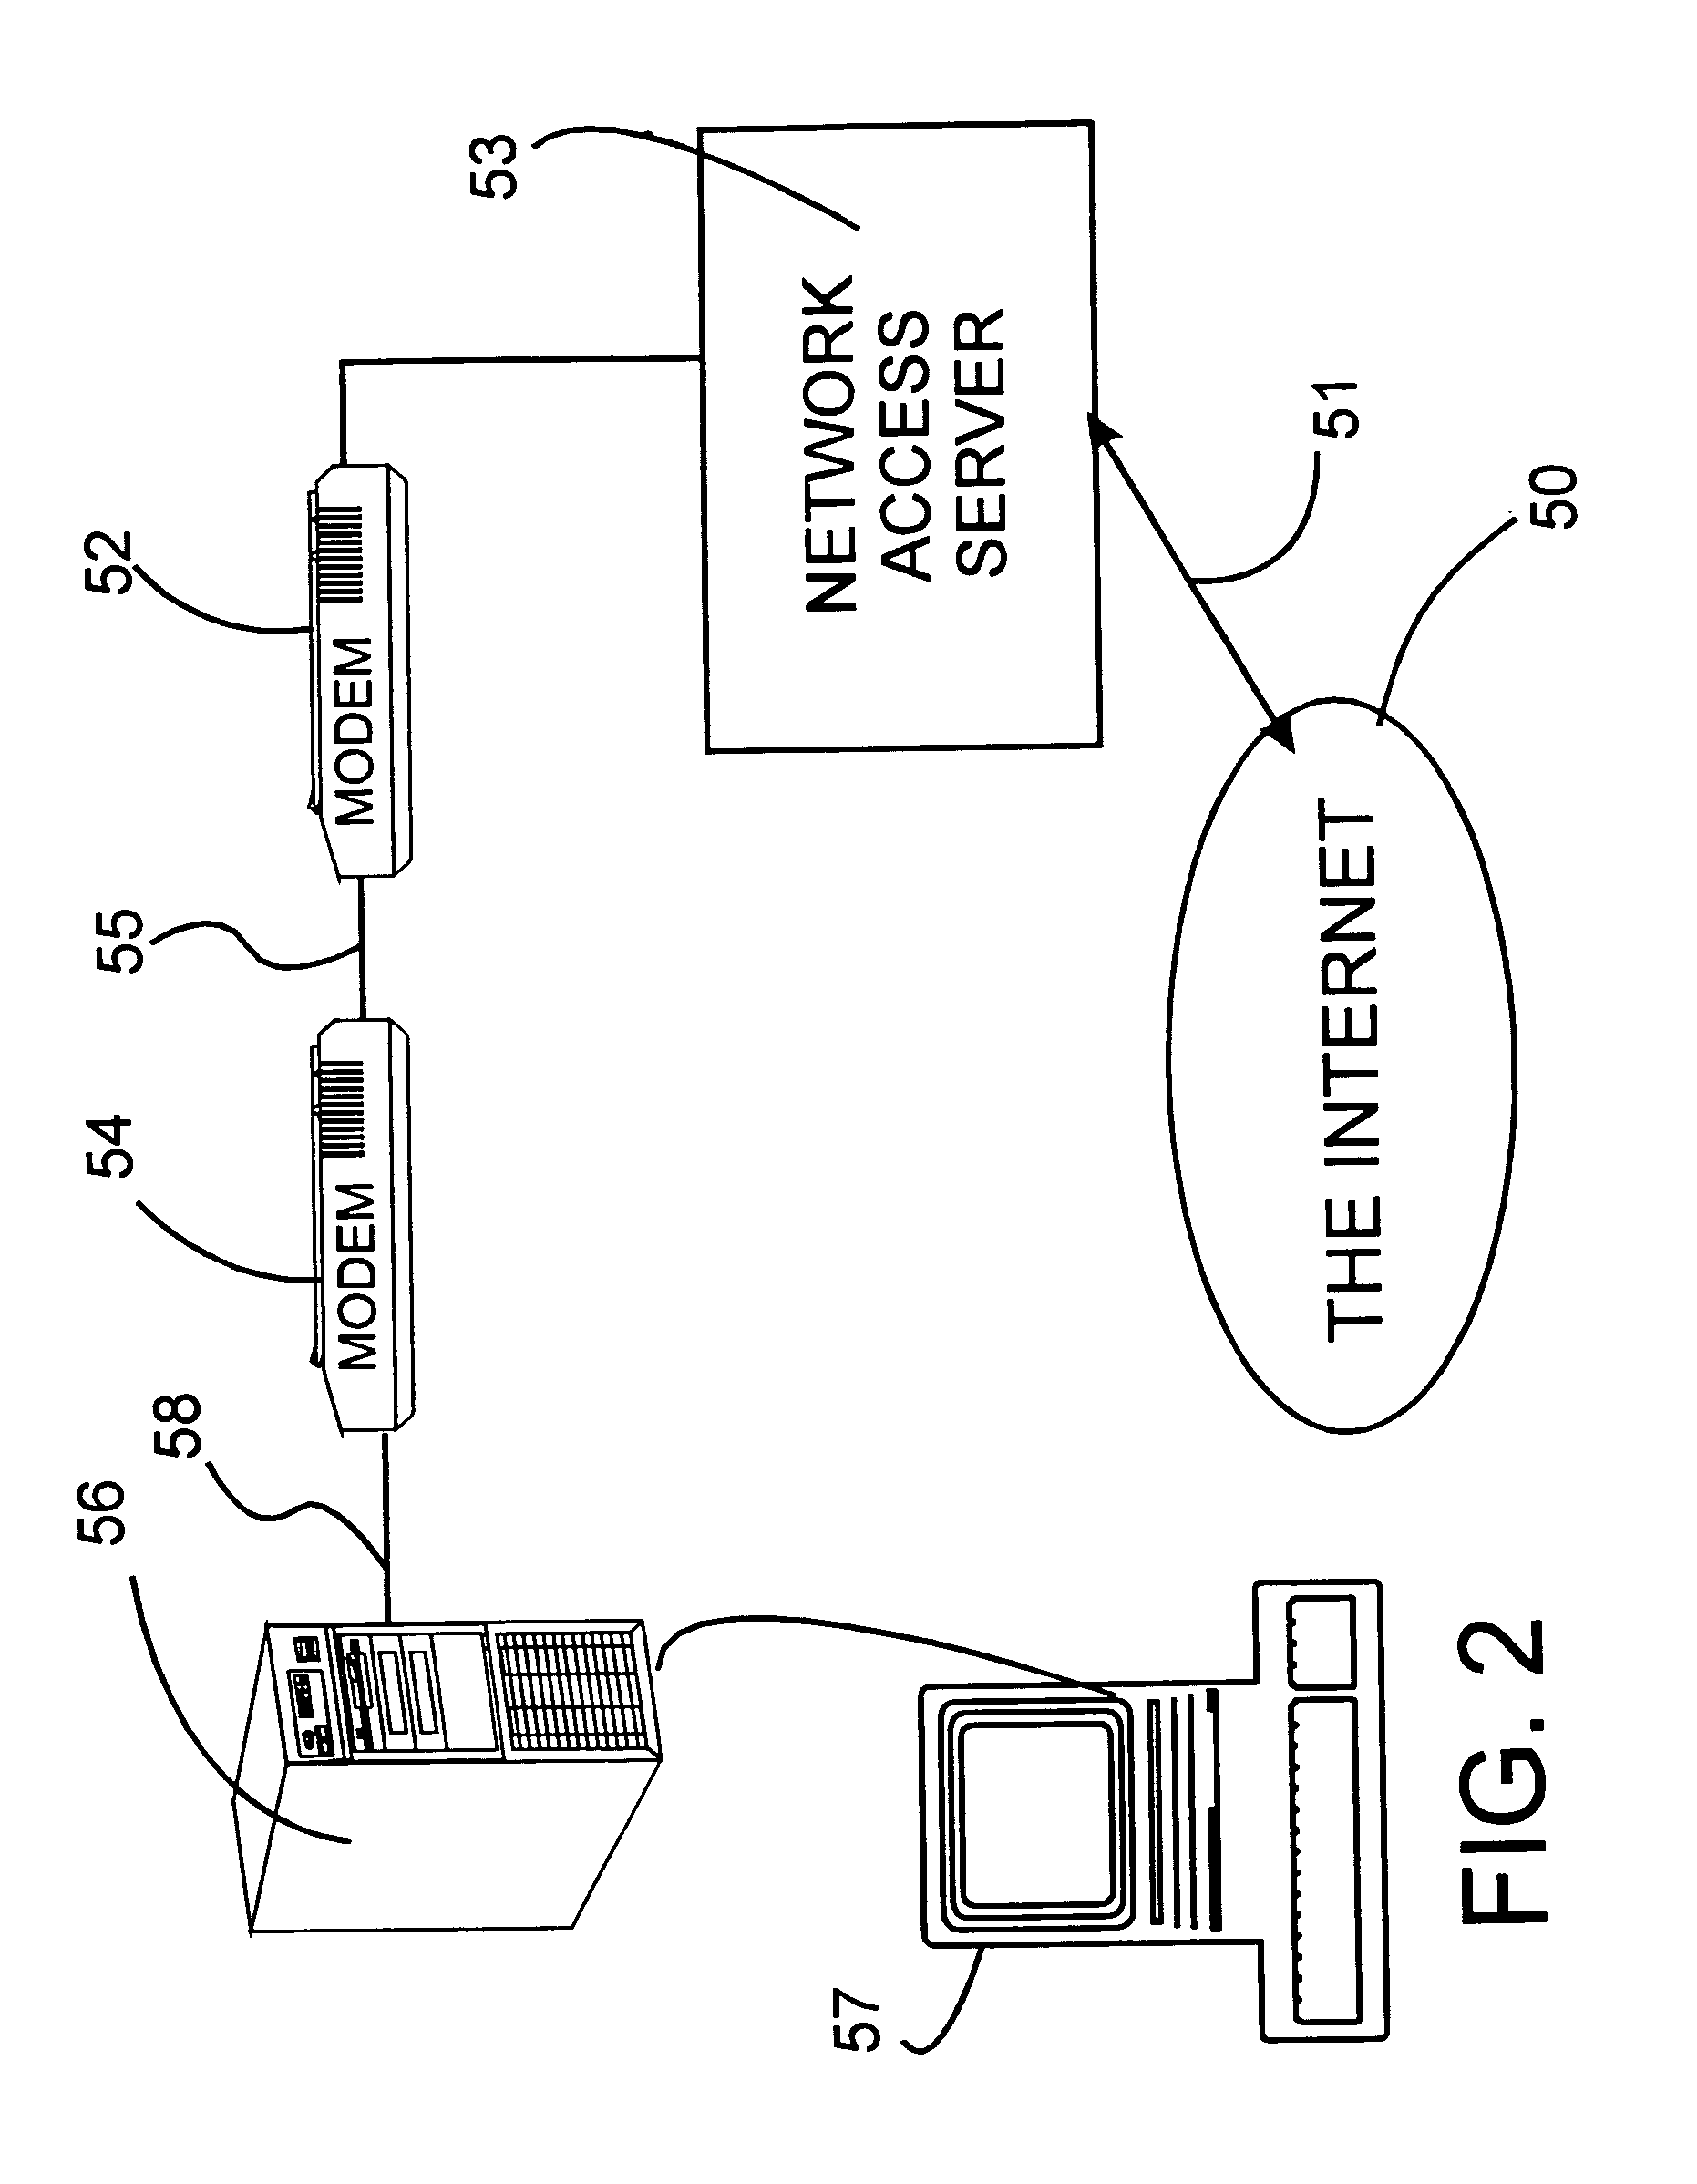 System for prioritizing of document presented on constrained receiving station interfaces to users of the internet personalized to each user's needs and interests